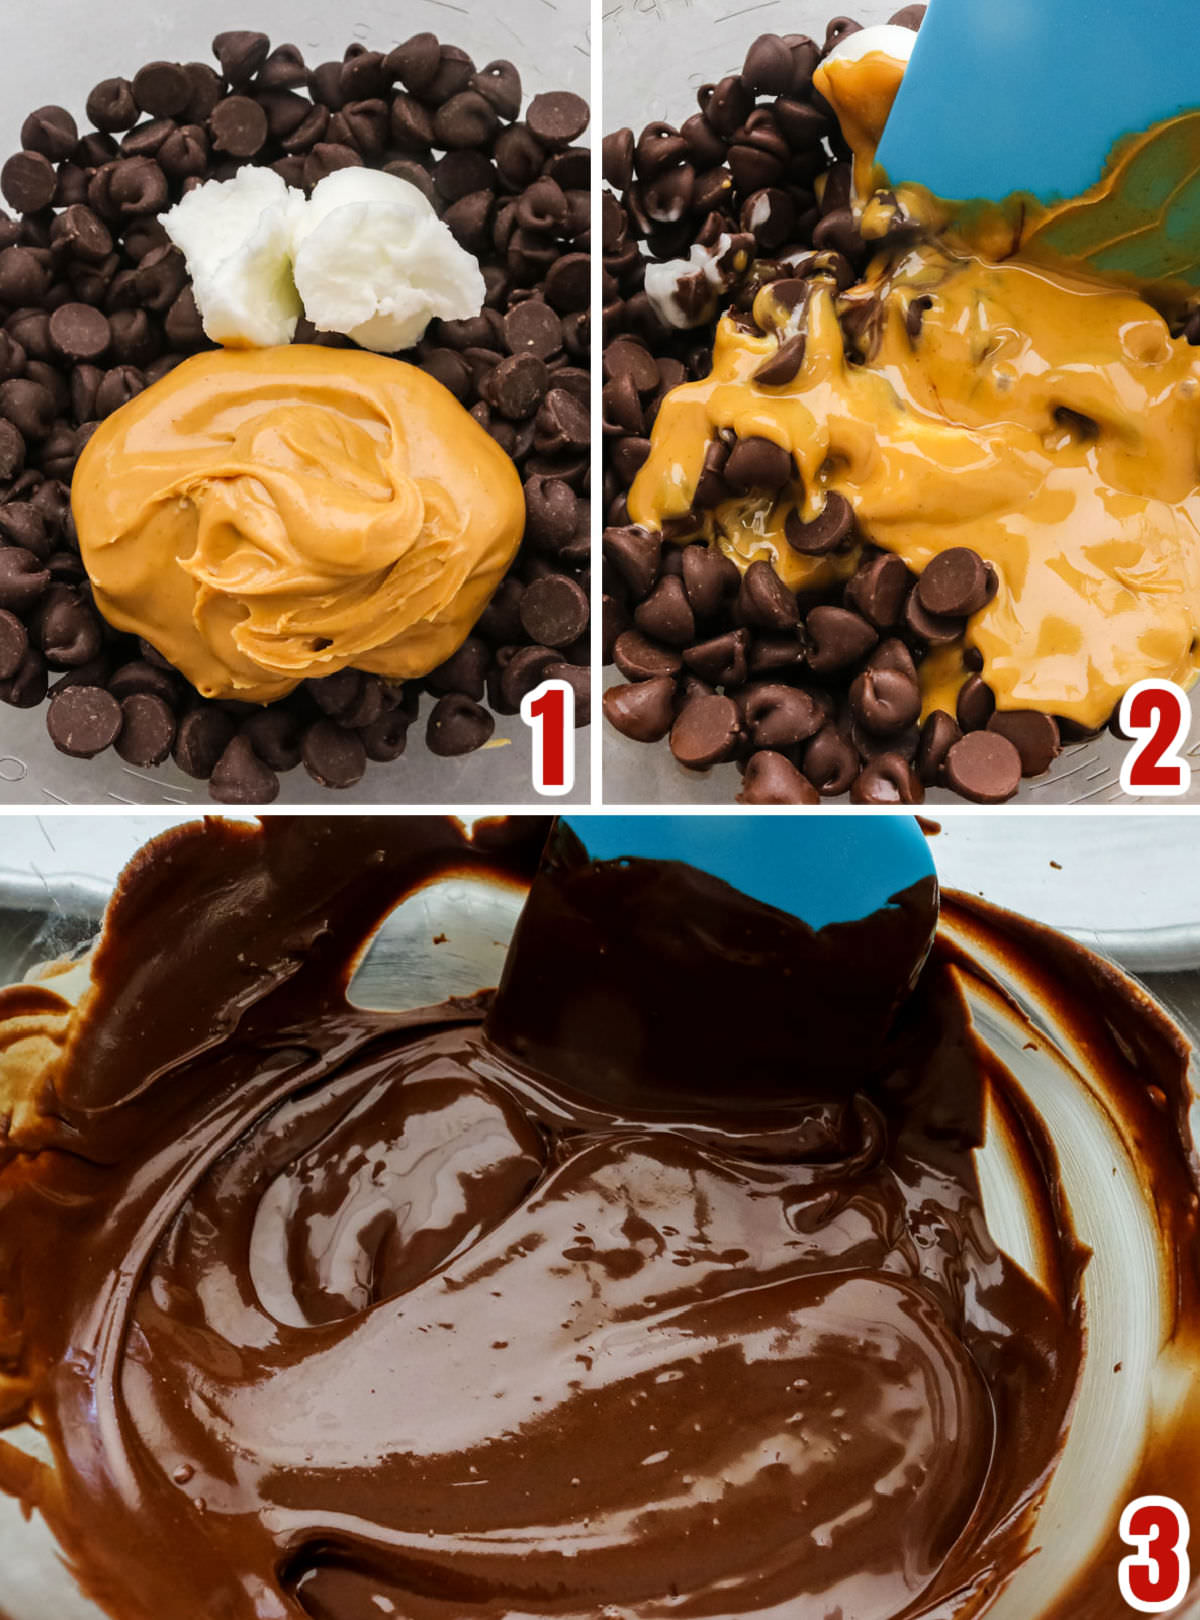 Collage image showing the steps for making the chocolate peanut butter mixture.